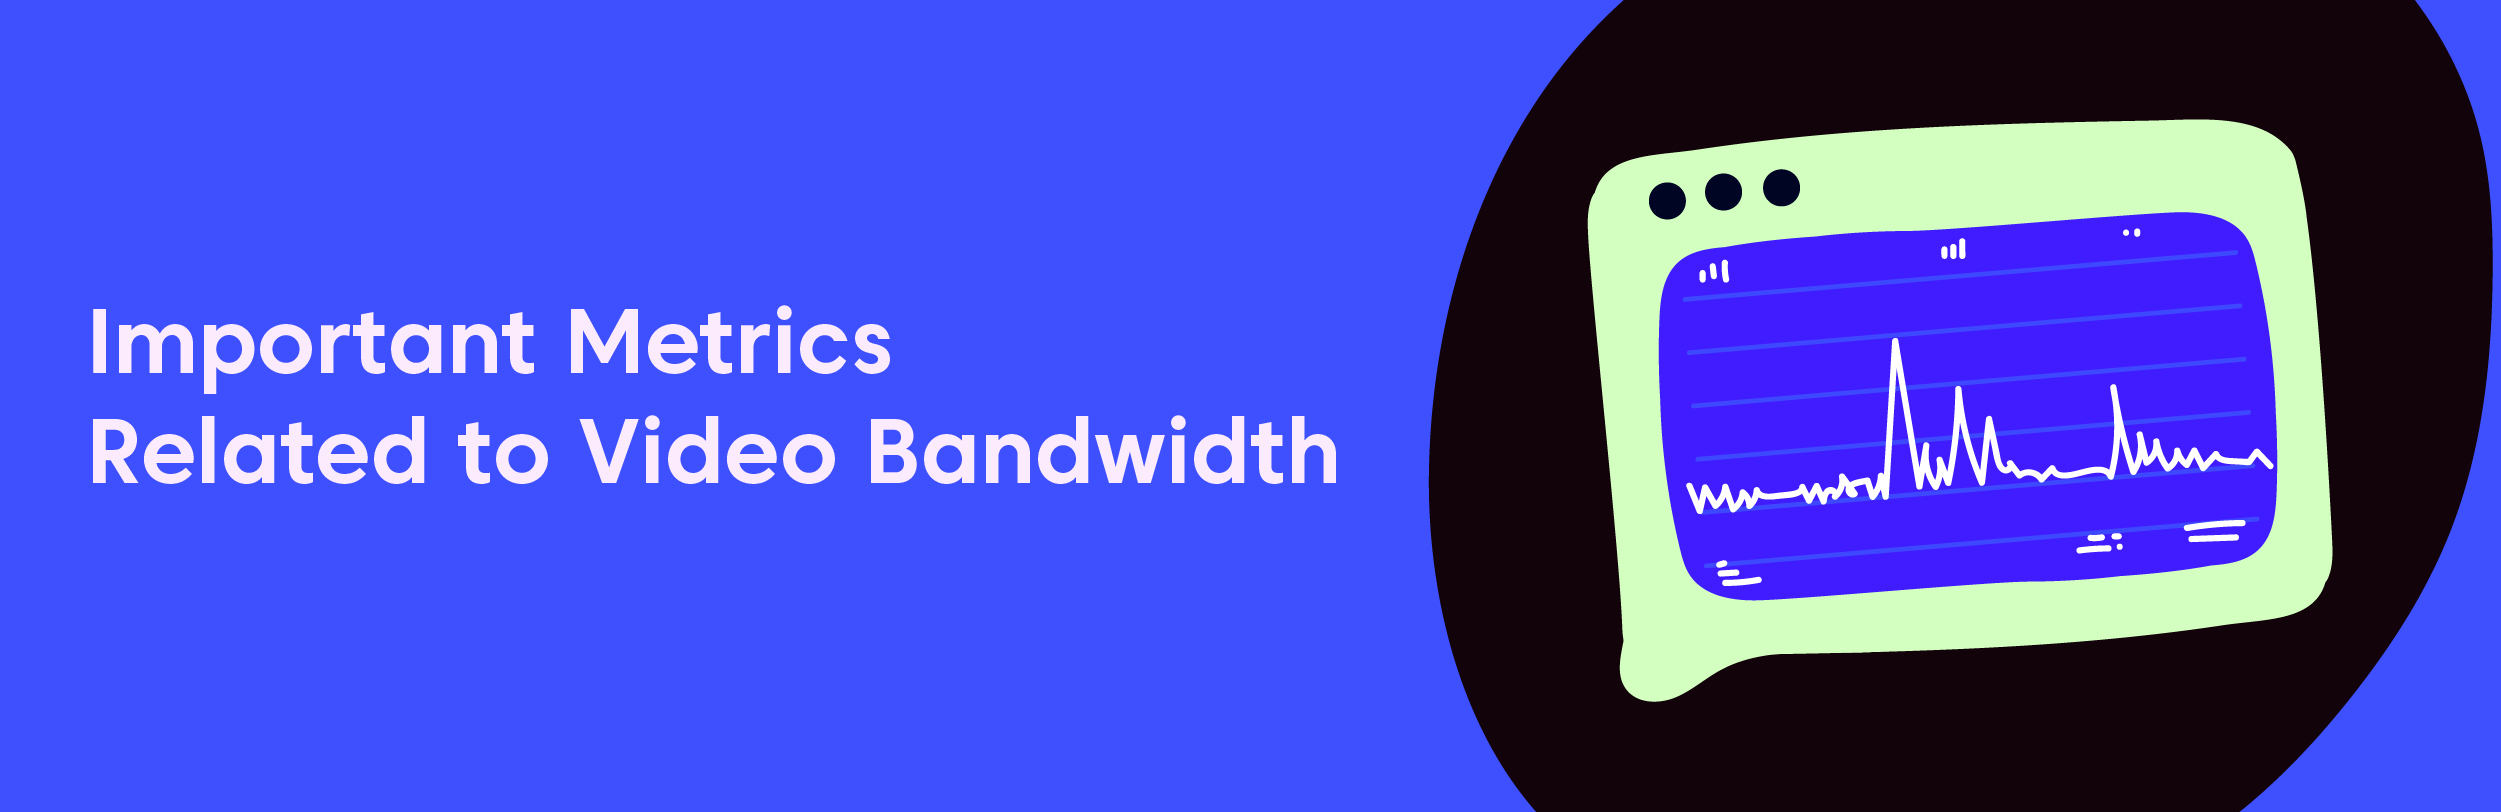 Important Metrics Related to Video Bandwidth